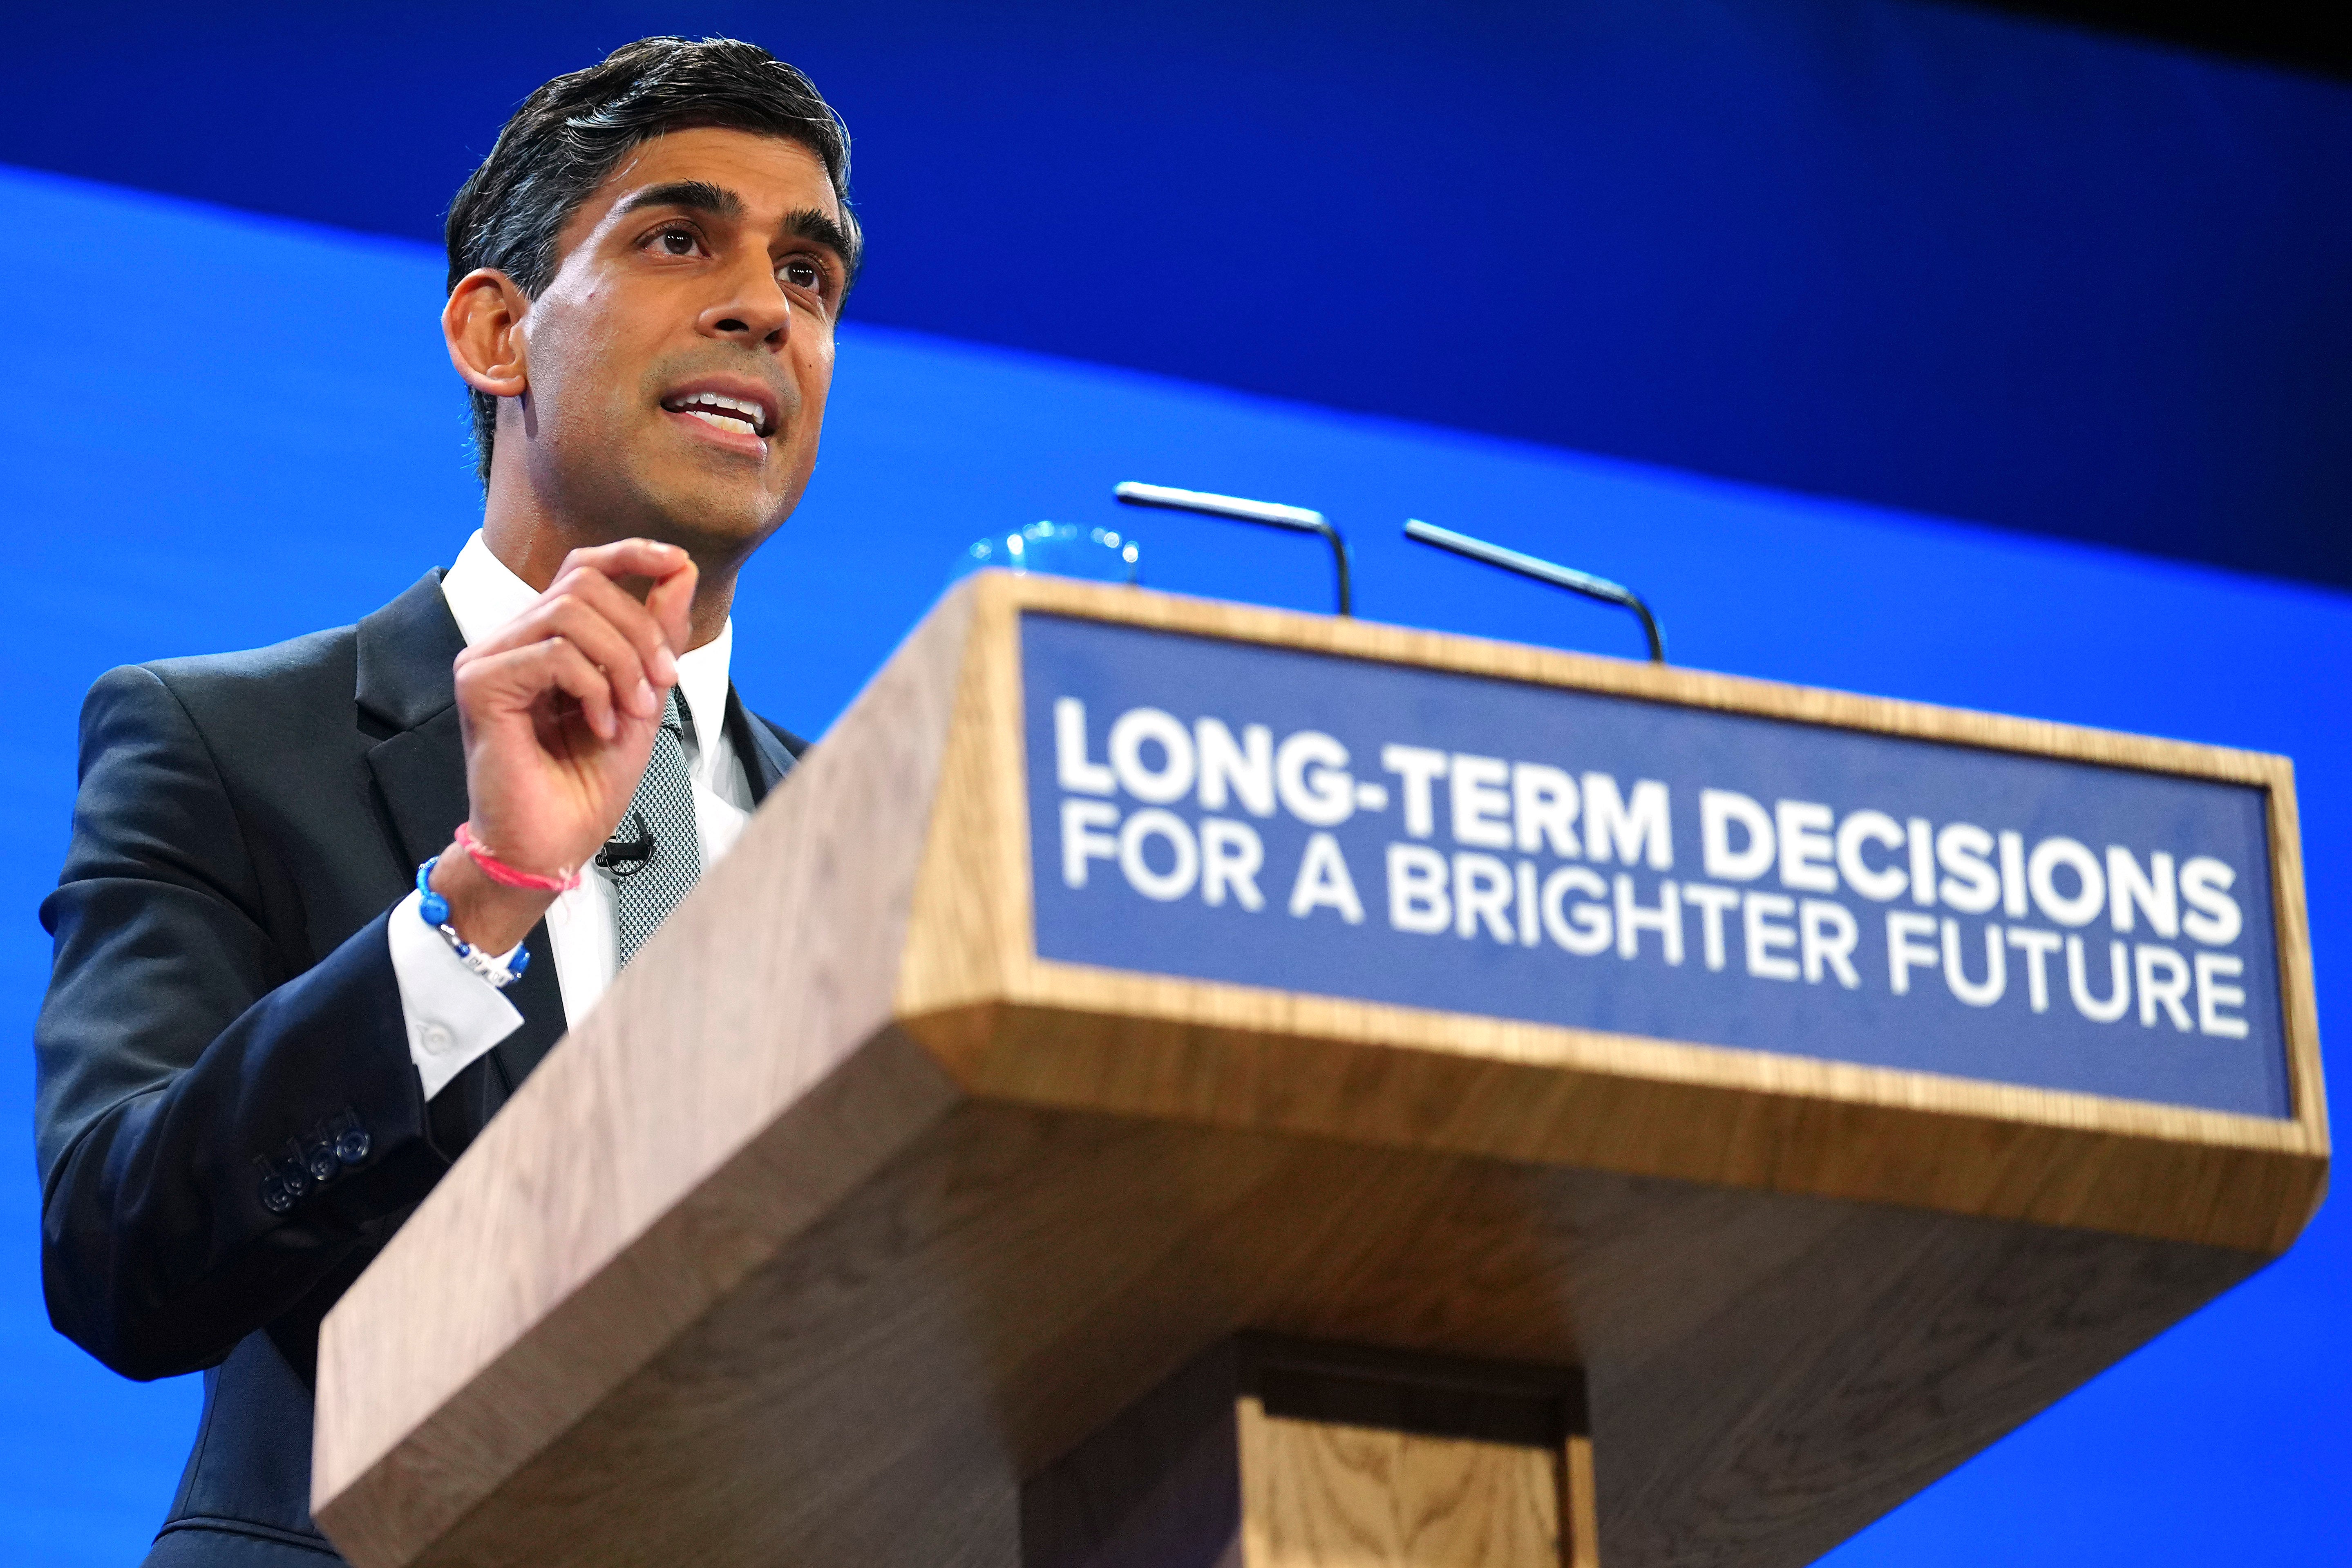 Britain’s Prime Minister Rishi Sunak speaks during the Conservative Party annual conference in Manchester